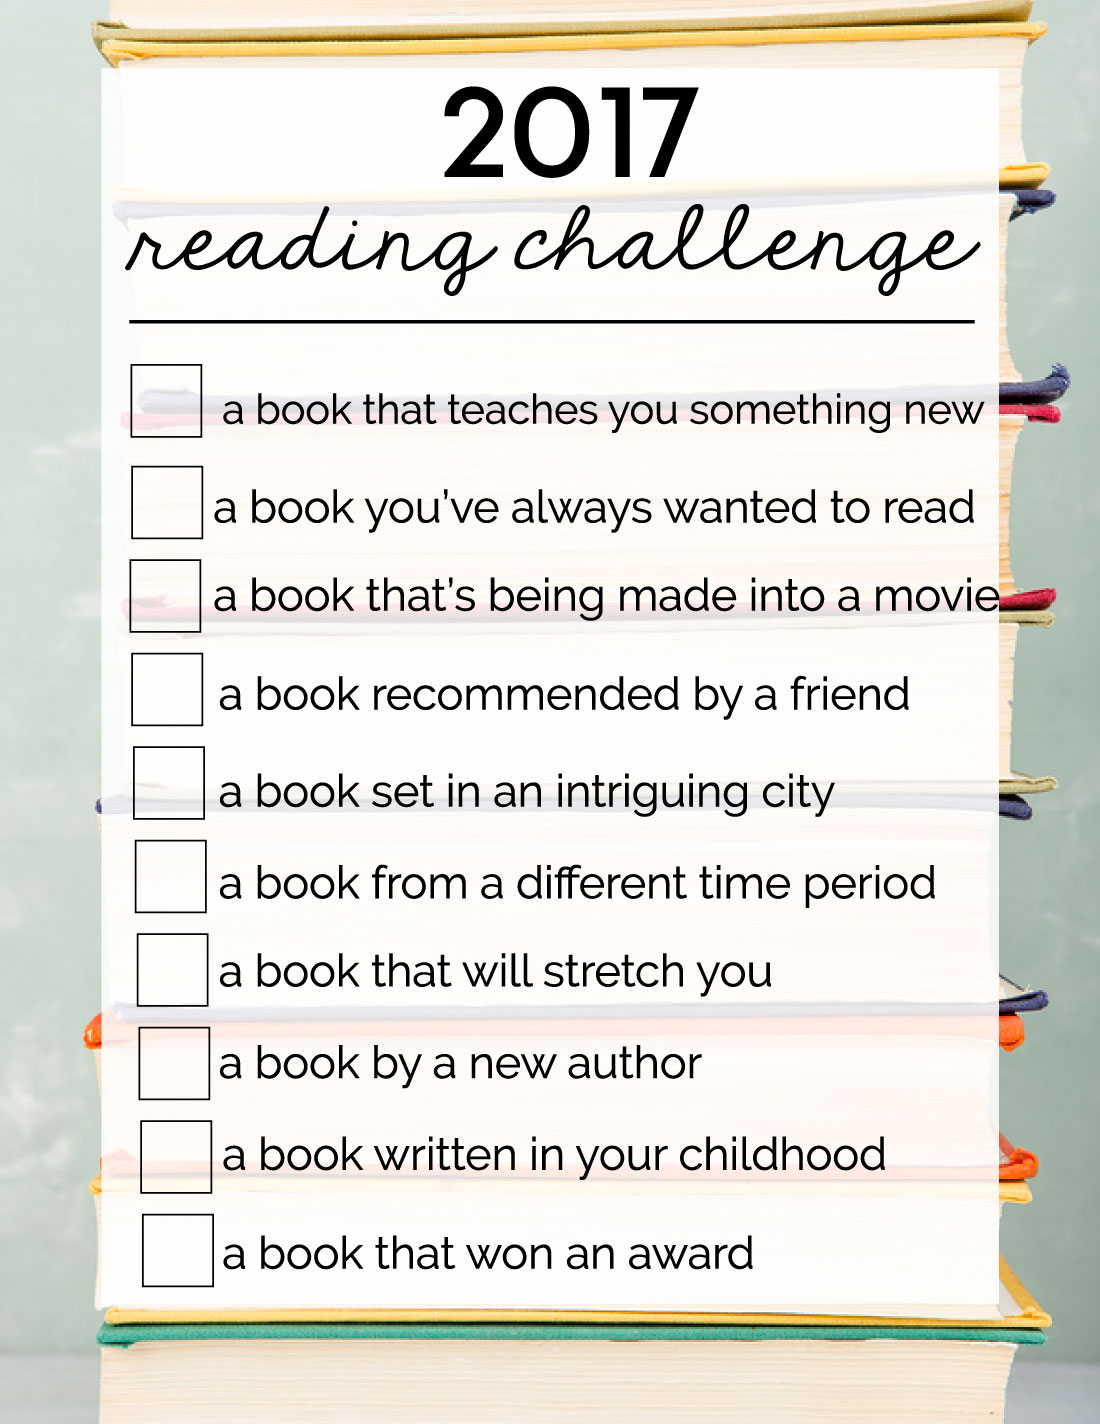 2017 Reading Challenge - 10 simple ideas to get lost in some good books and learn to love to read again! 